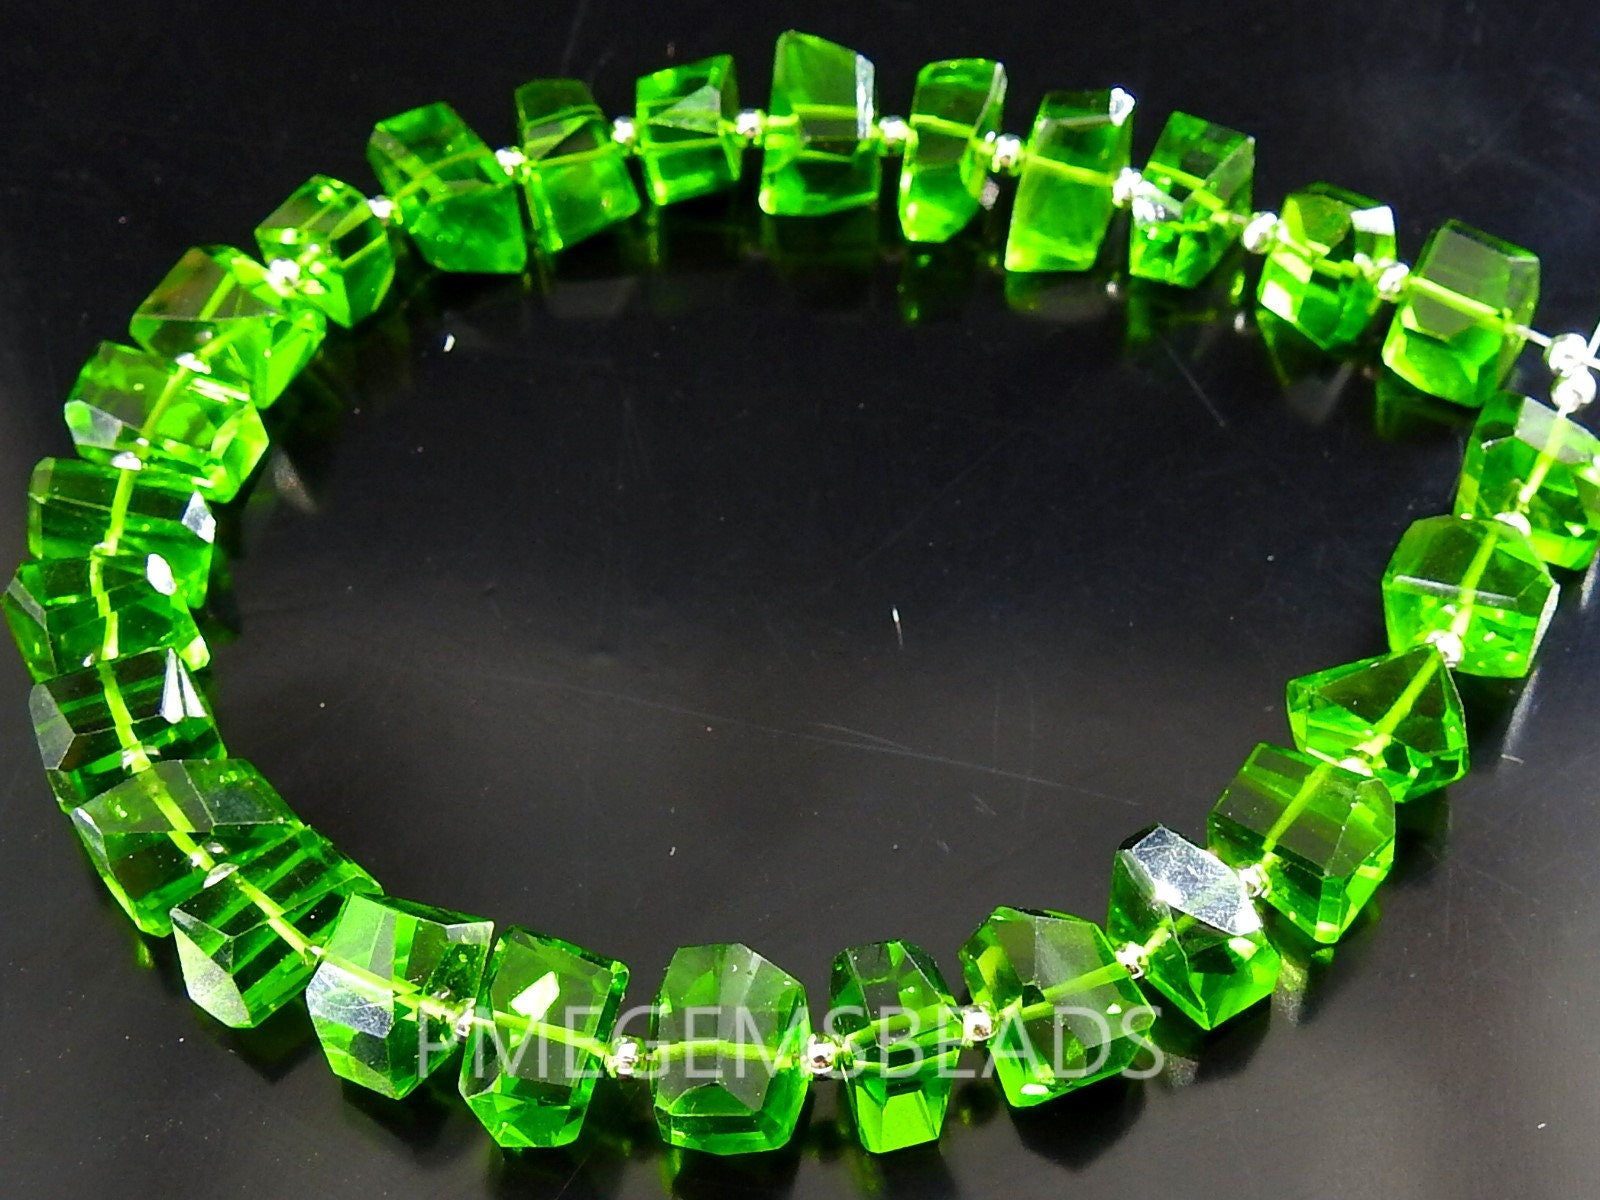 Chrome Green Quartz Faceted Tumble,Nugget,Hydro,Irregular,Loose Stone,For Making Jewelry,Necklace,Bracelet 8Inch 8-10MM Approx (pme) | Save 33% - Rajasthan Living 21